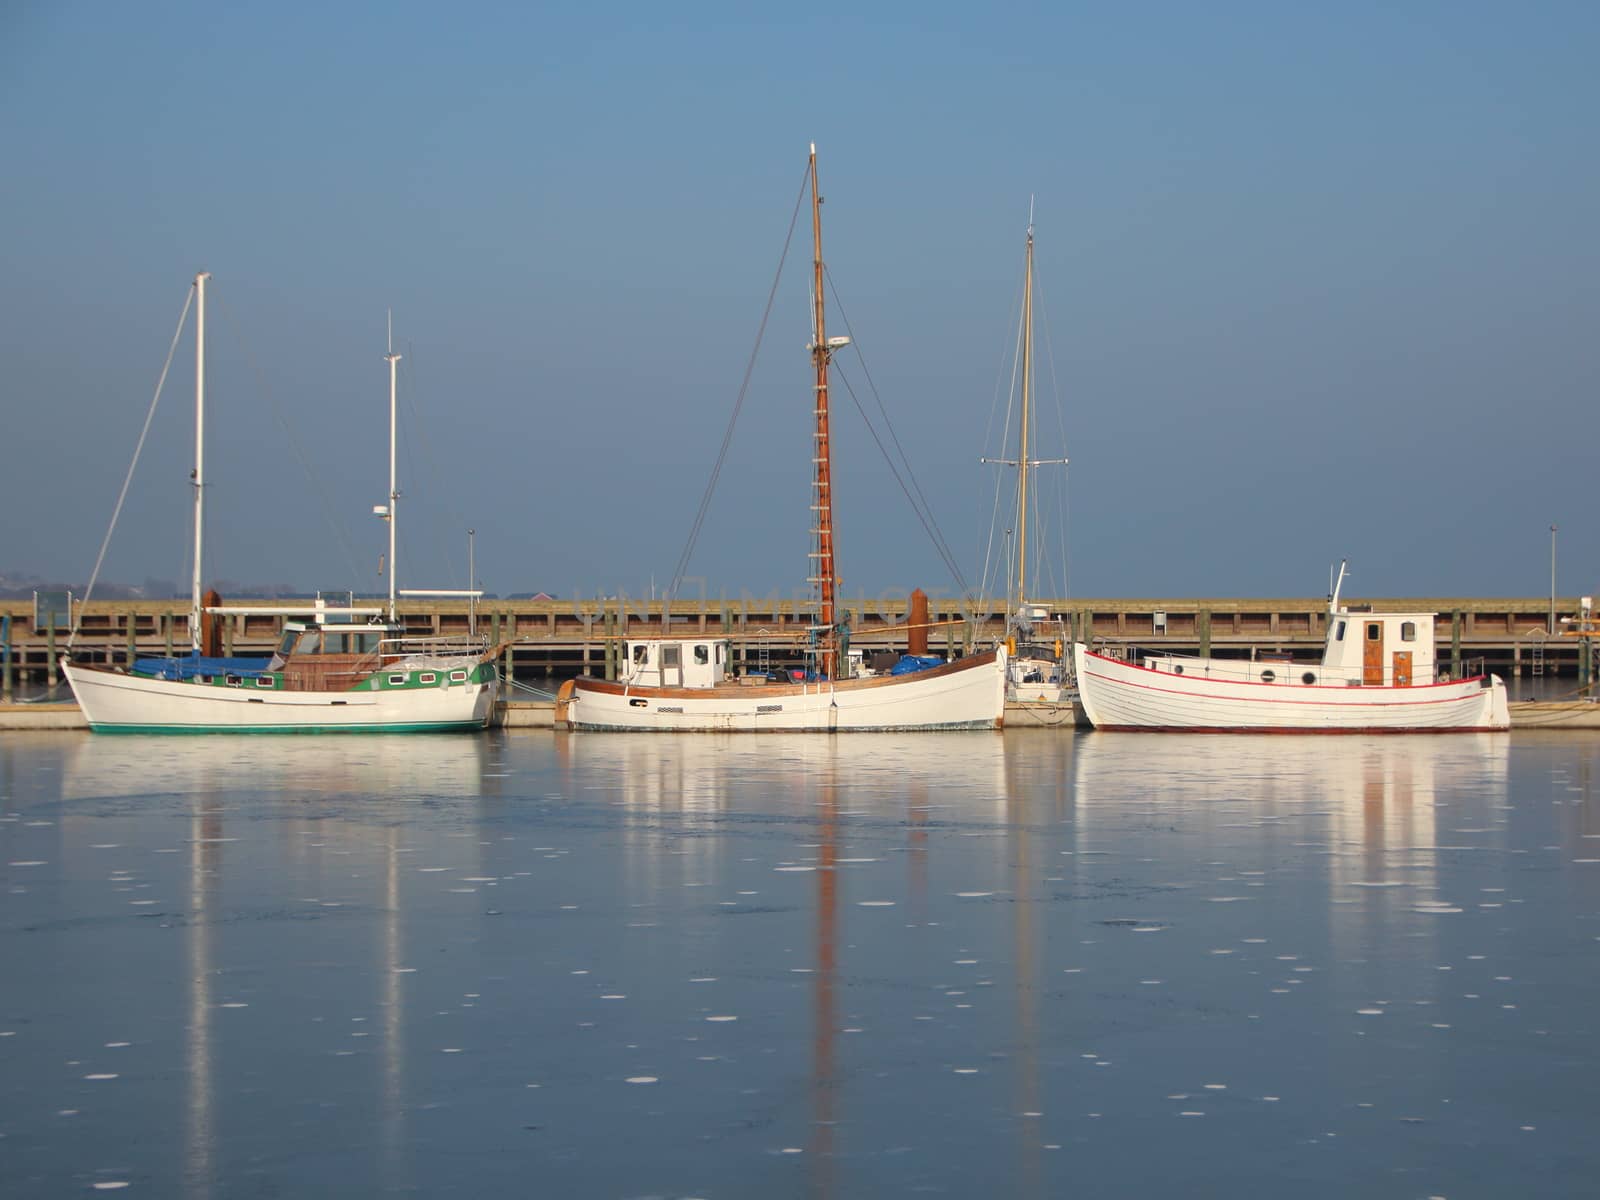 Three Boats in Frozen Cold Harbor Water at Wintertime by HoleInTheBox